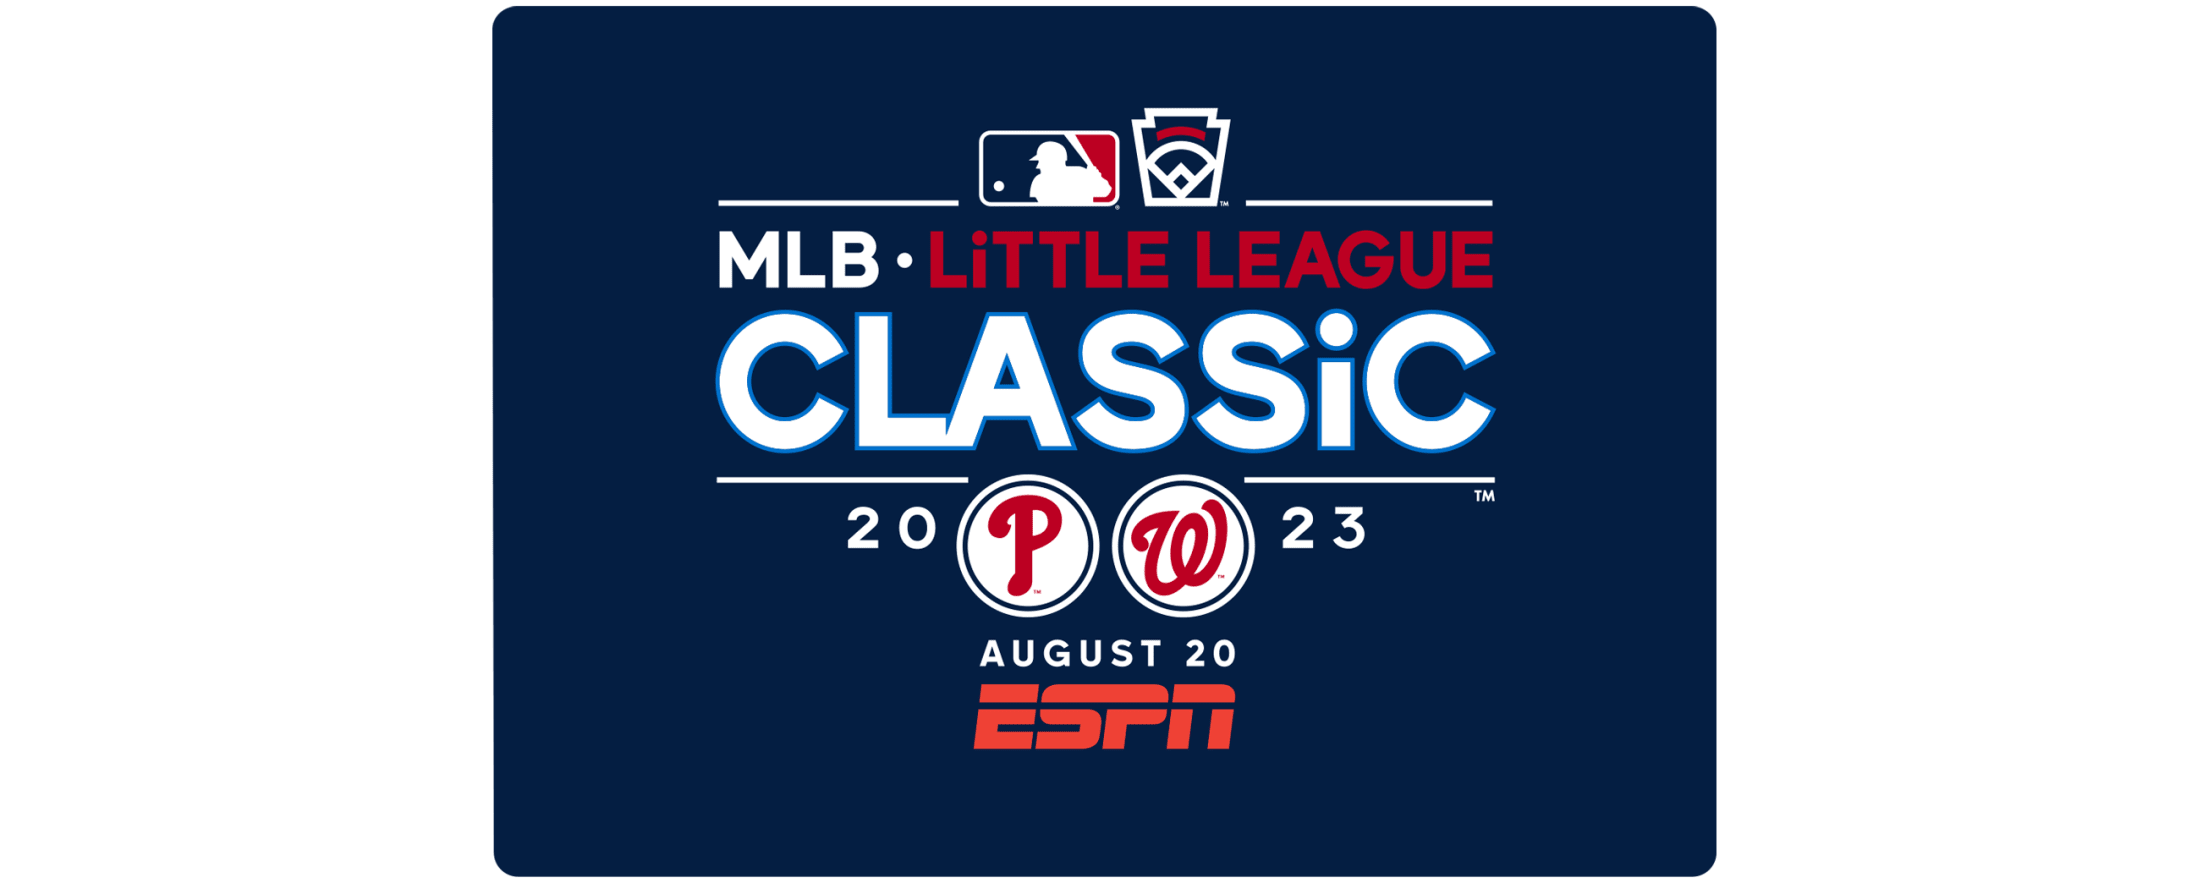 MLB players excited to partake in MLB Little League Classic